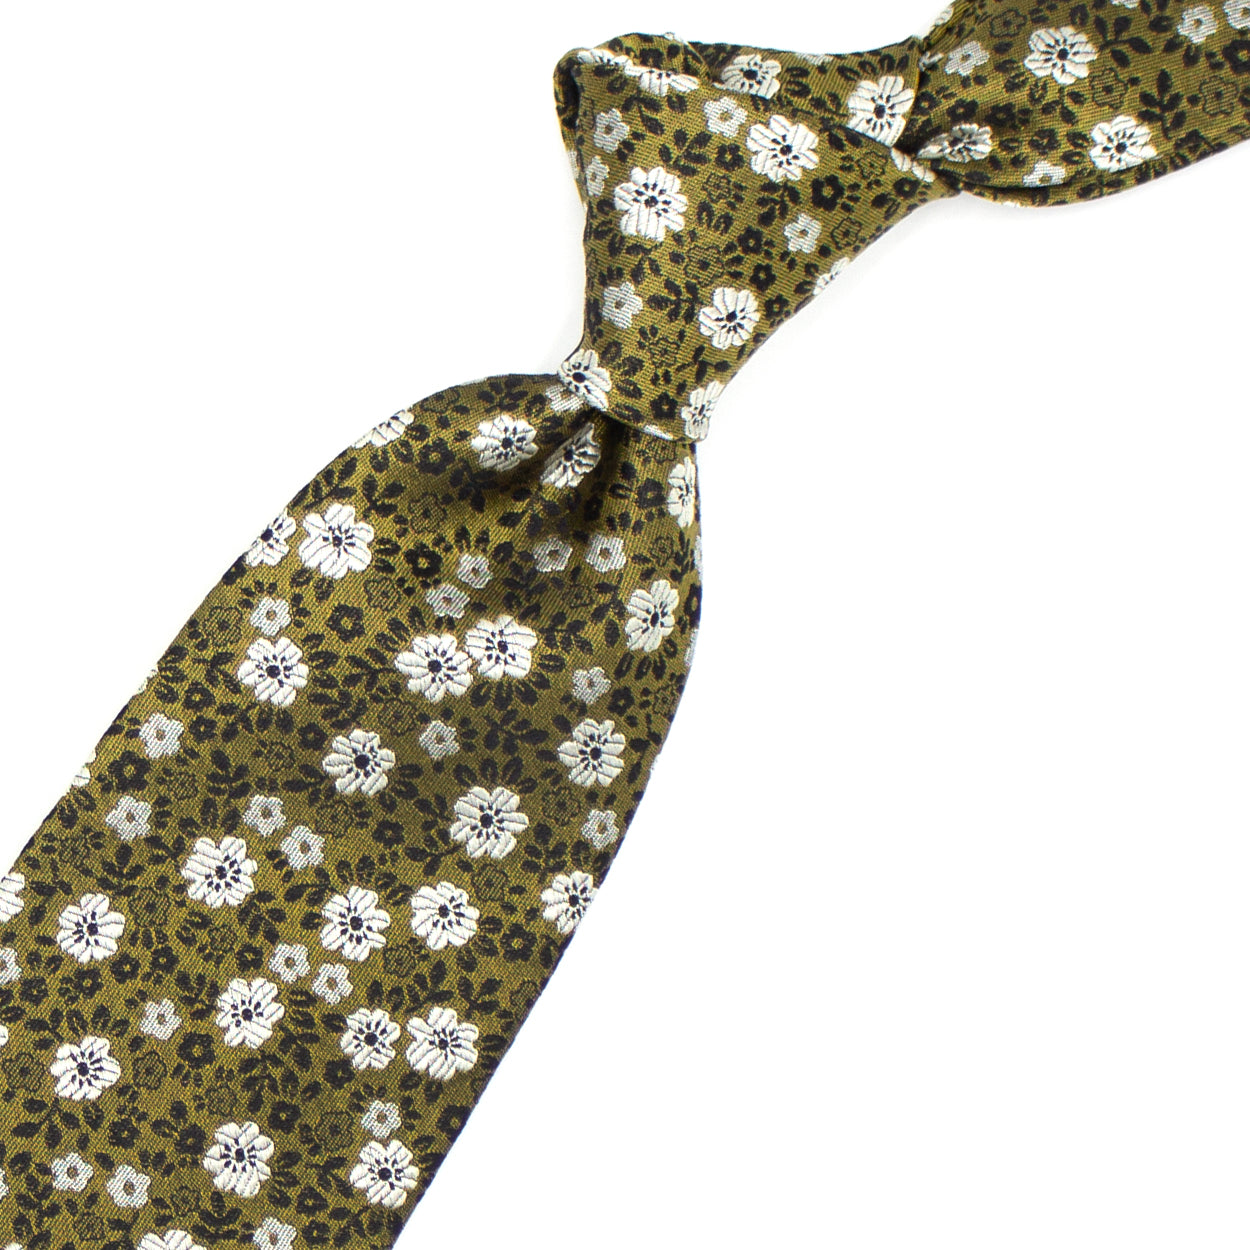 Green tie with white and brown flowers